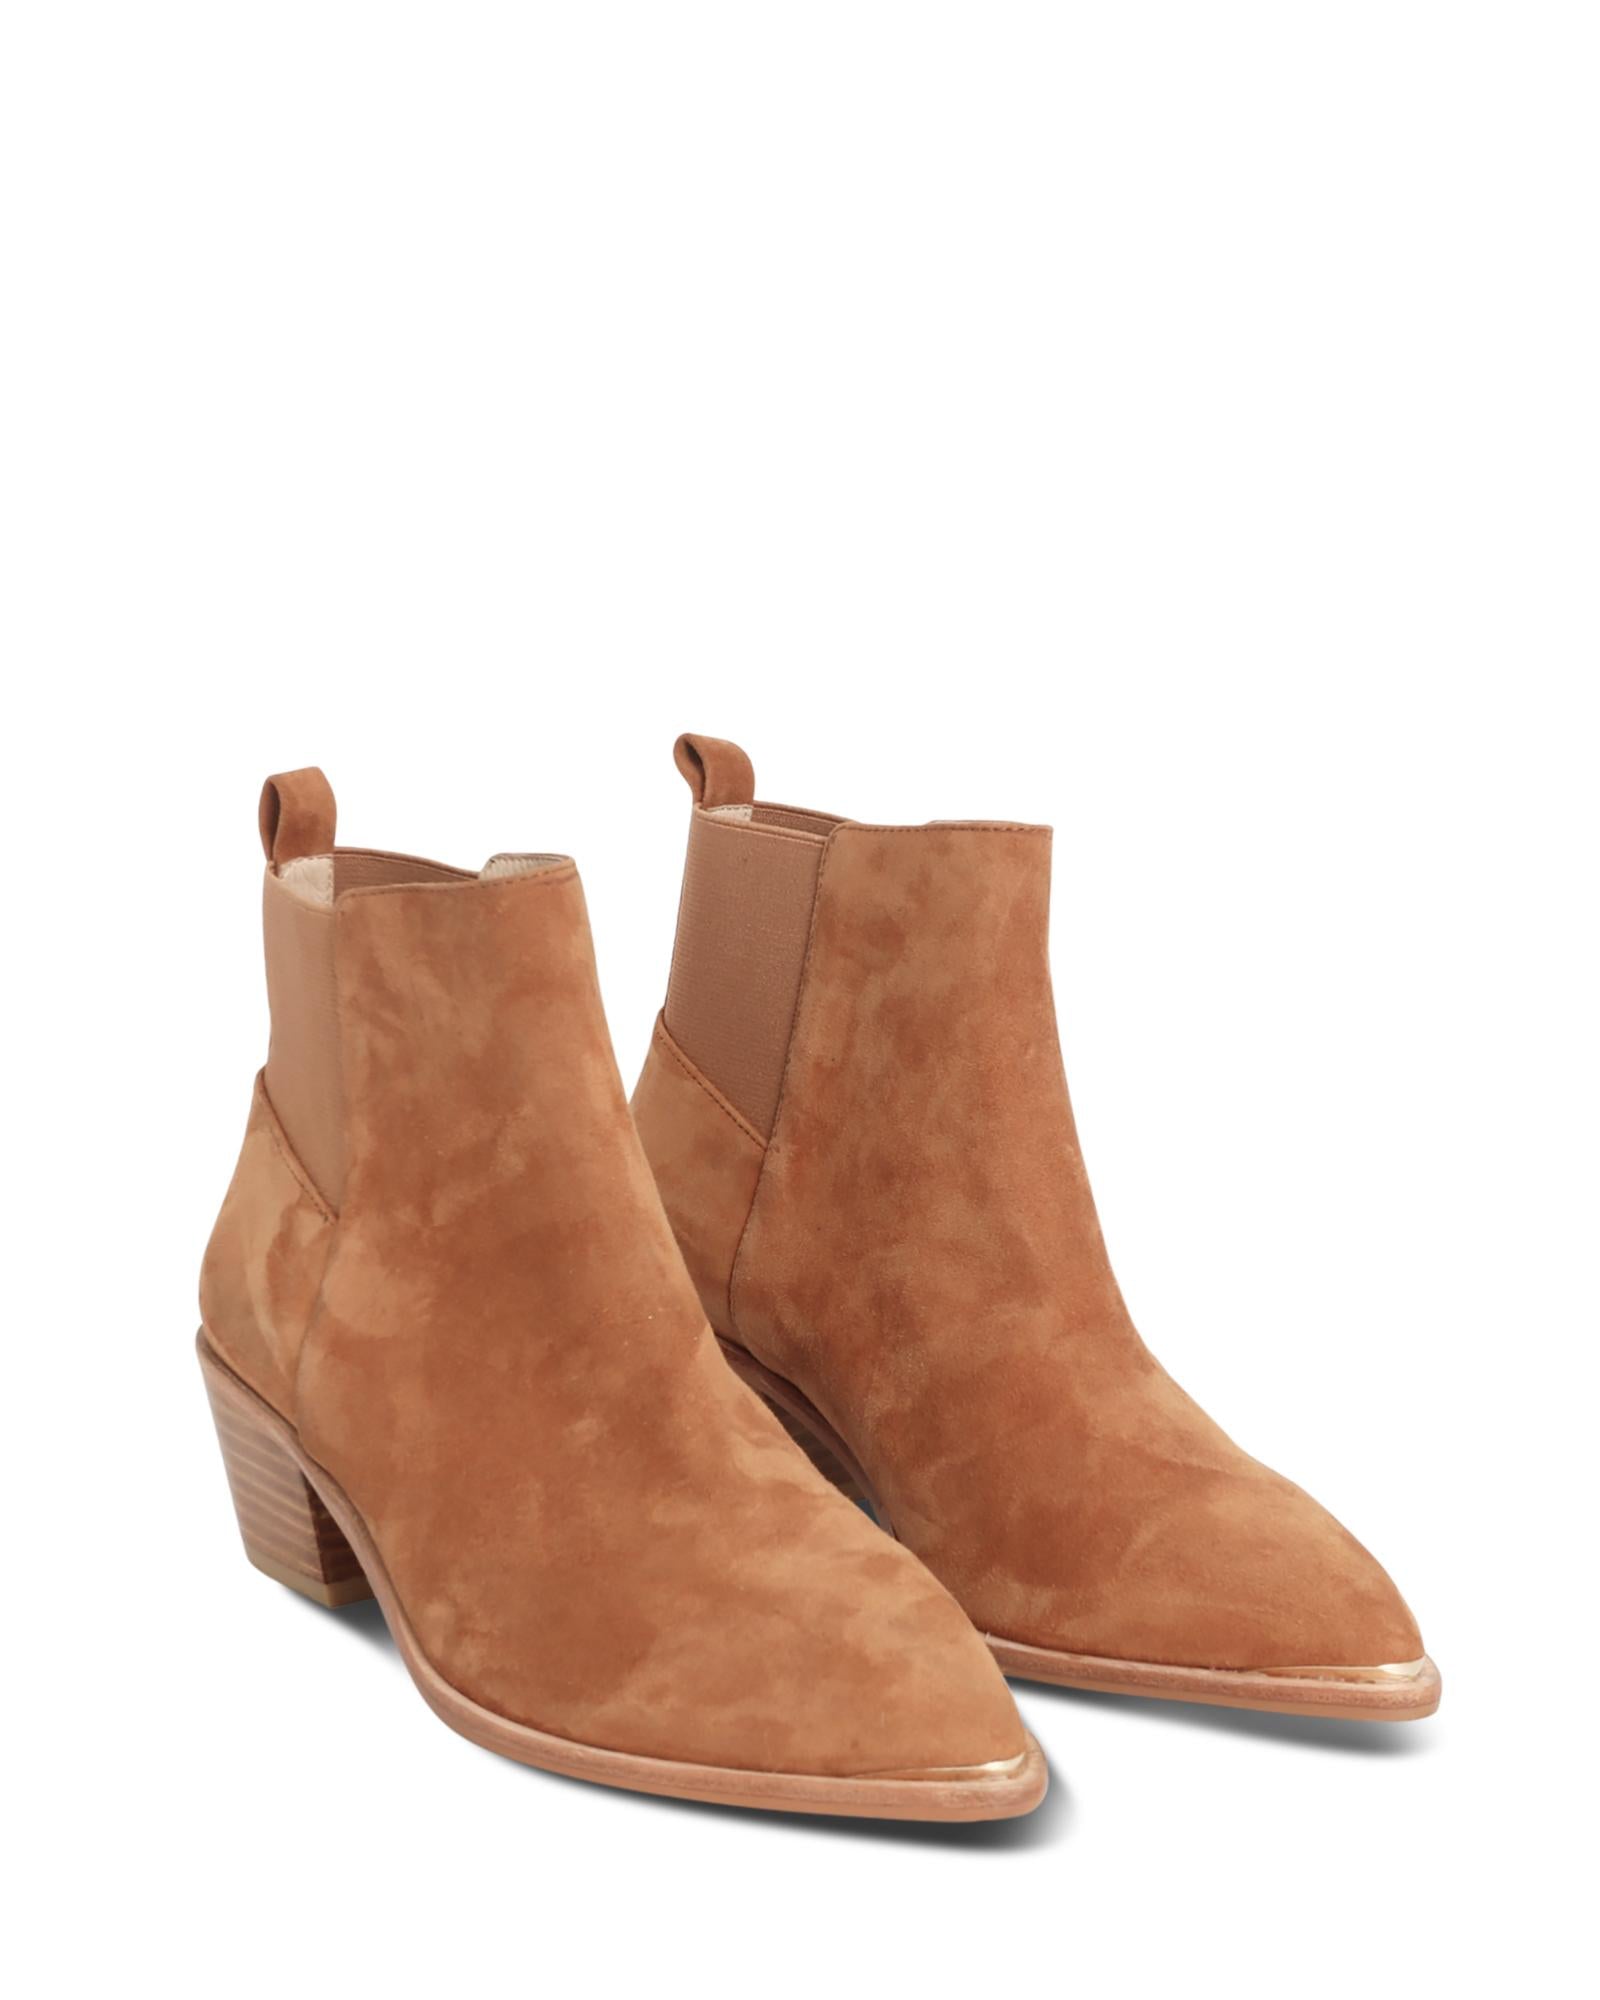 Reese Tan 5cm Ankle Boot